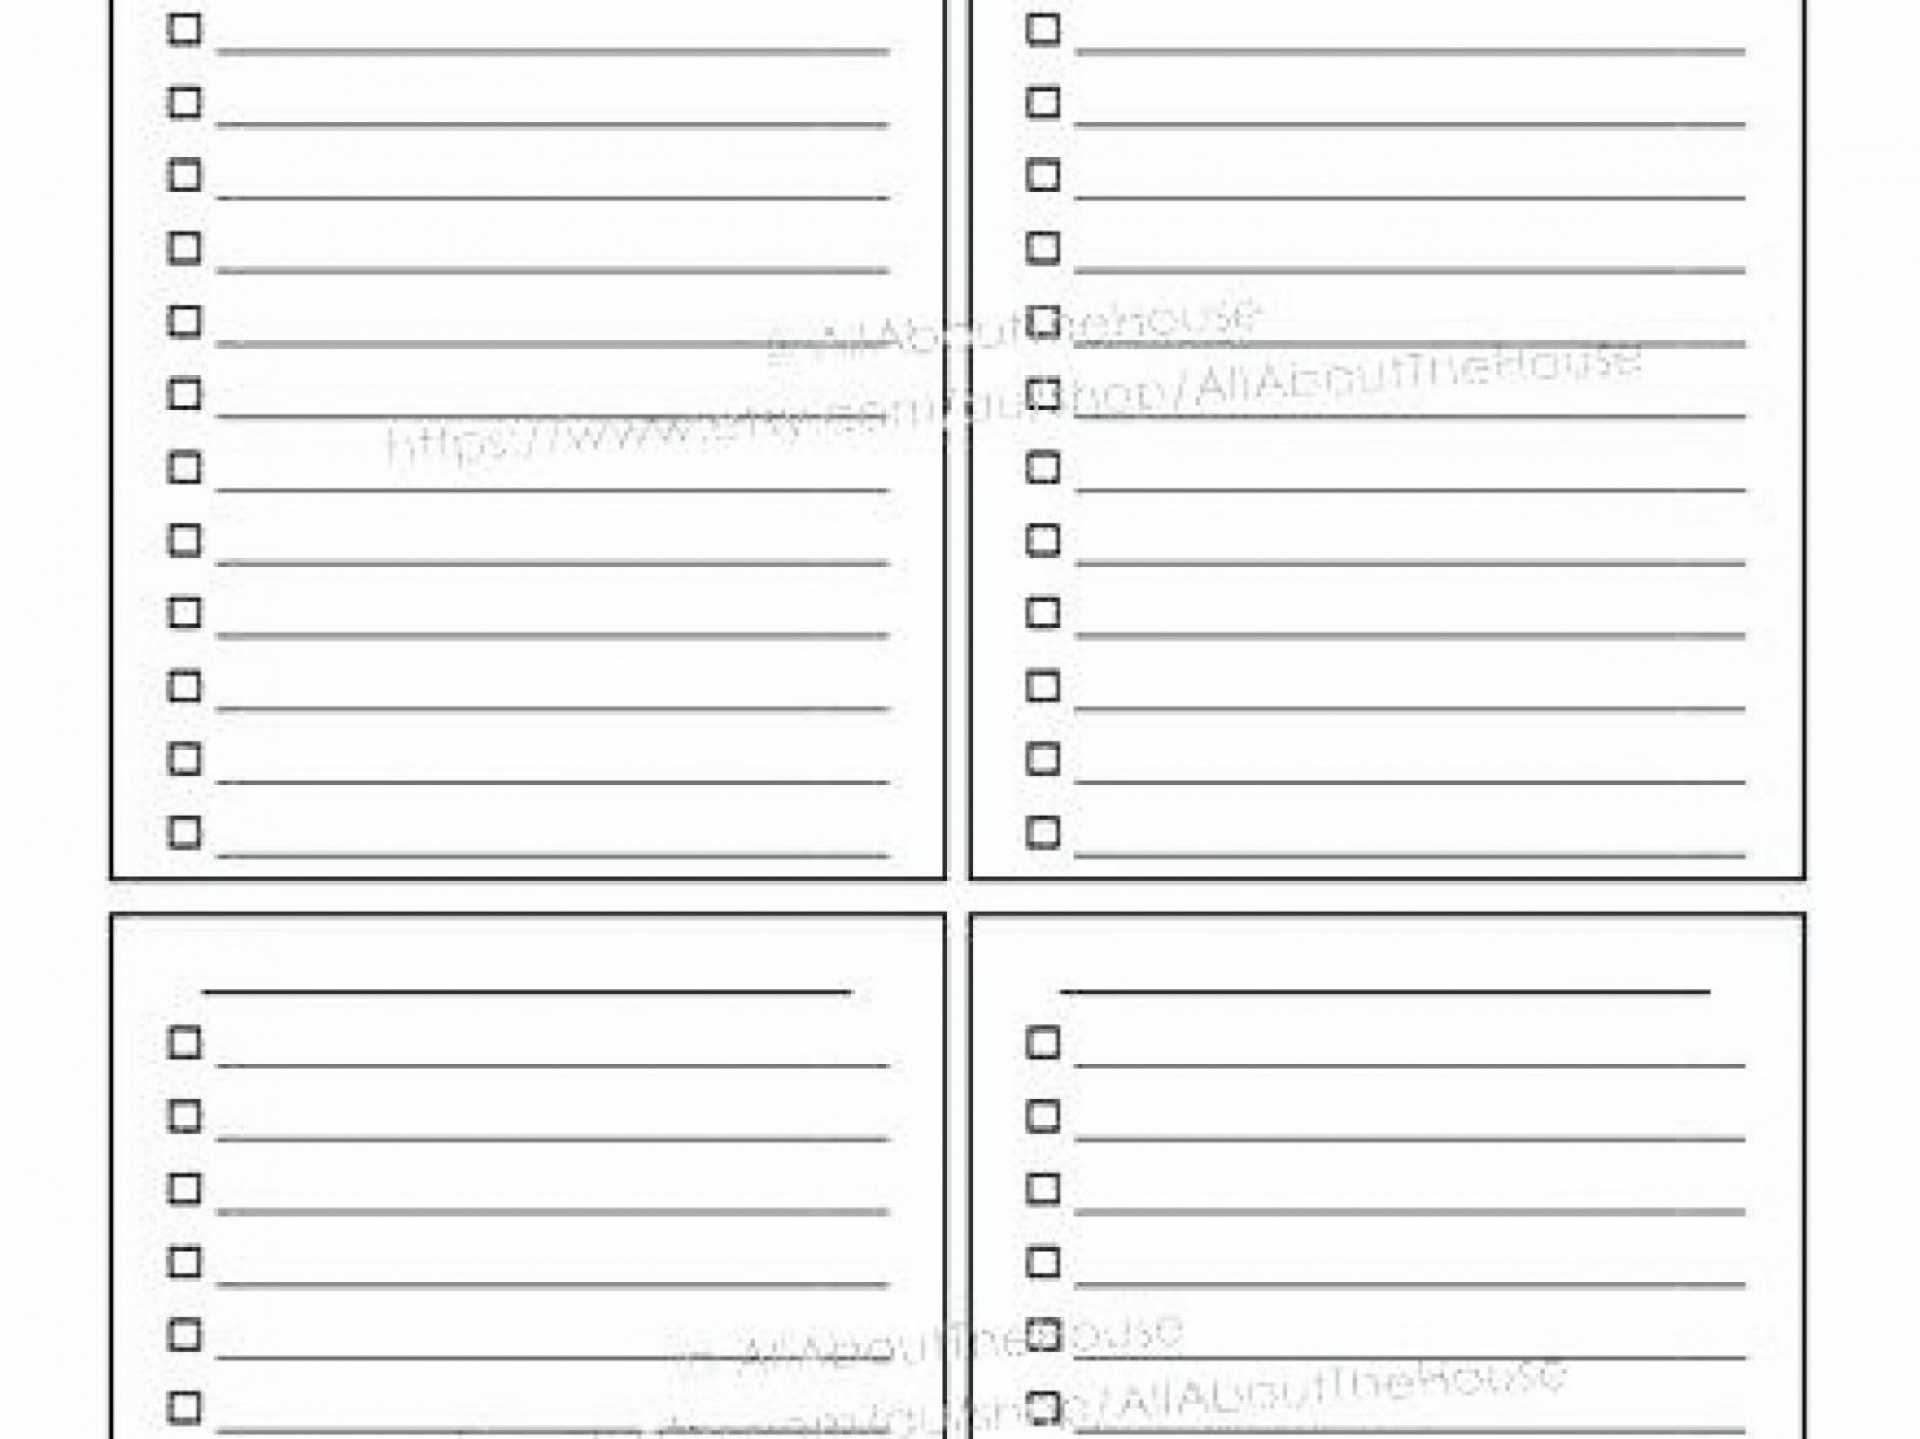 022 Todo List Template Word Spring Cleaning Checklist Inside Blank Checklist Template Pdf